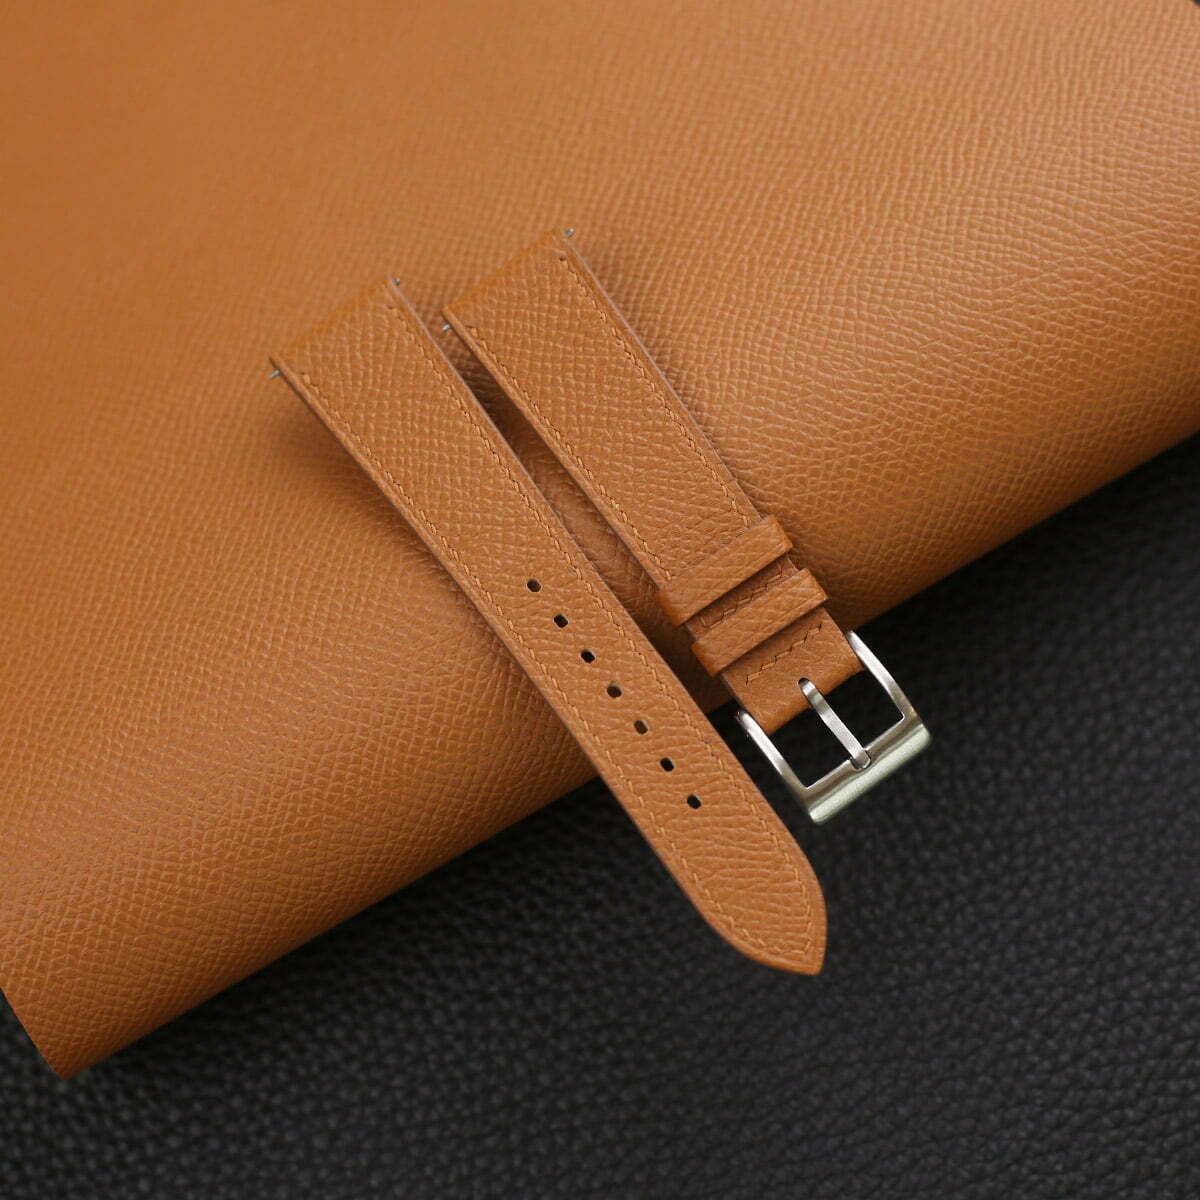 Double Tour Epsom Brown Leather for Hermes Watch ( White, Orange, Red, Brown, Black 9 Colors) 9-Epsom Purple 14mm Lug width+12mm Buckle Width